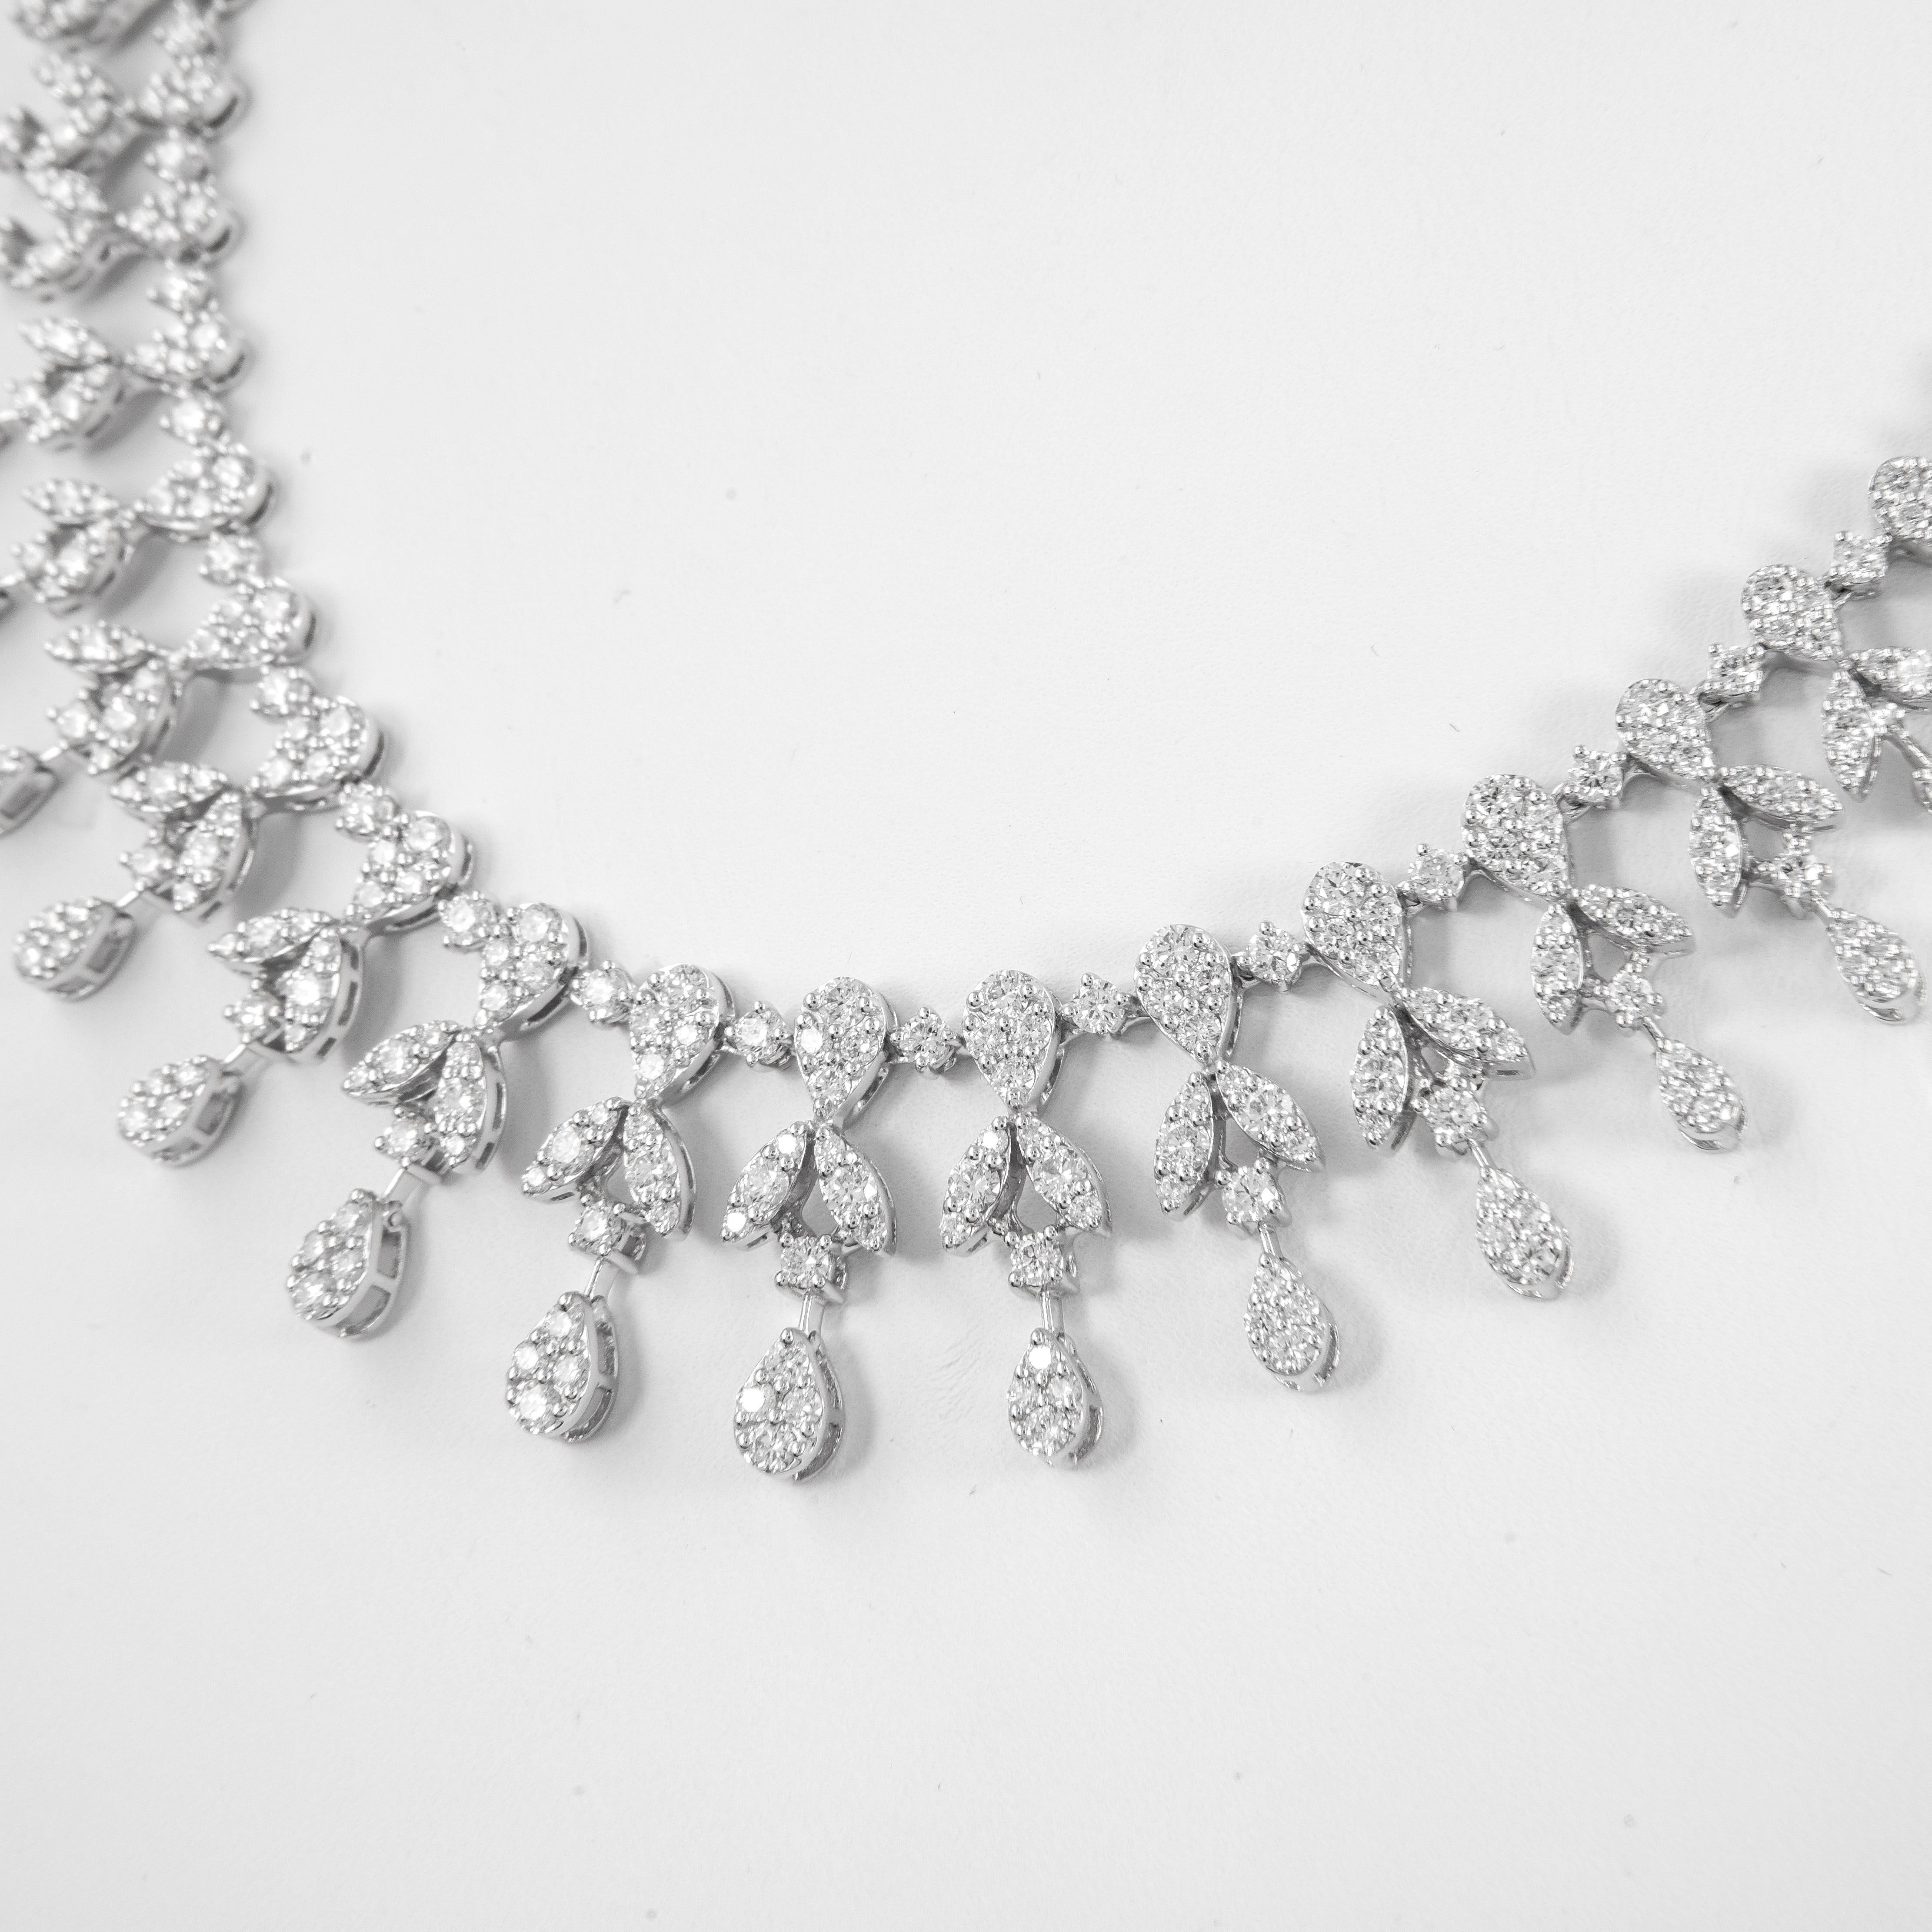 Exquisite grand multi diamond necklace. 
341 round brilliant diamonds, 7.57 carats. Approximately H/I color and VS2/SI1 clarity. 18k white gold, 36.22 grams, 17 inches.
Accommodated with an up to date appraisal by a GIA G.G. upon purchase, please